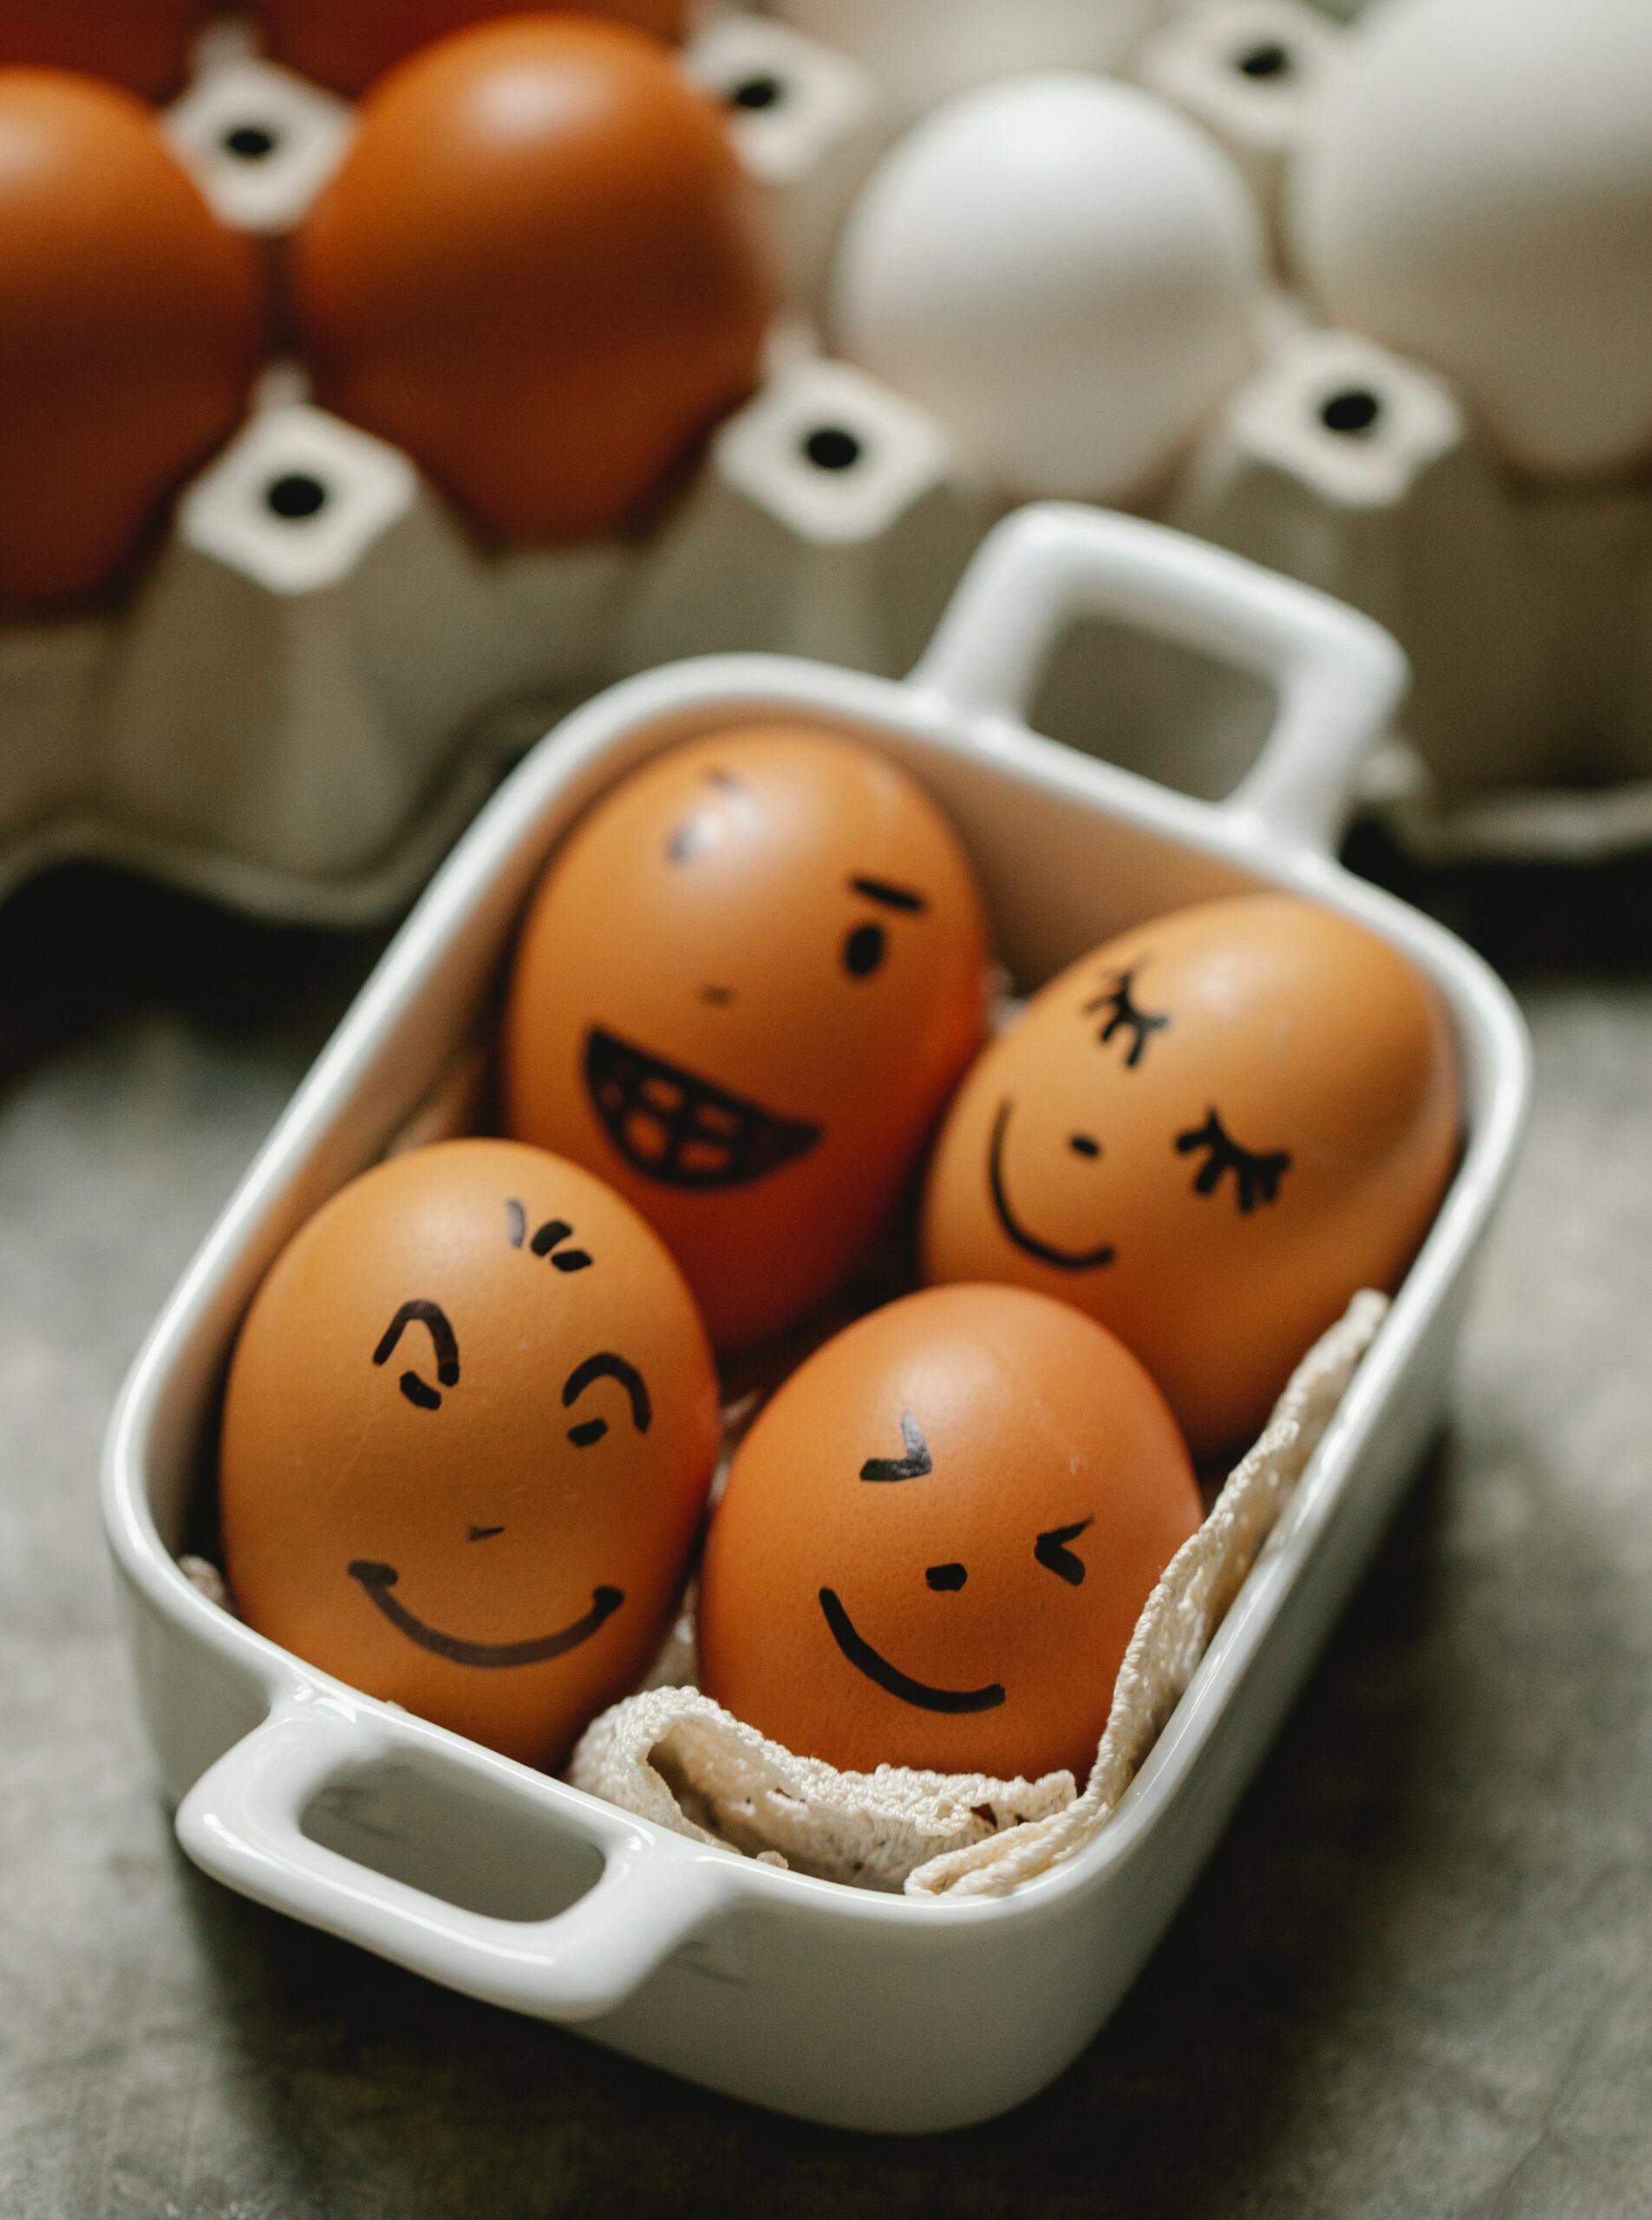 Four brown eggs with faces drawn on them. They are all smiling but have different types of faces